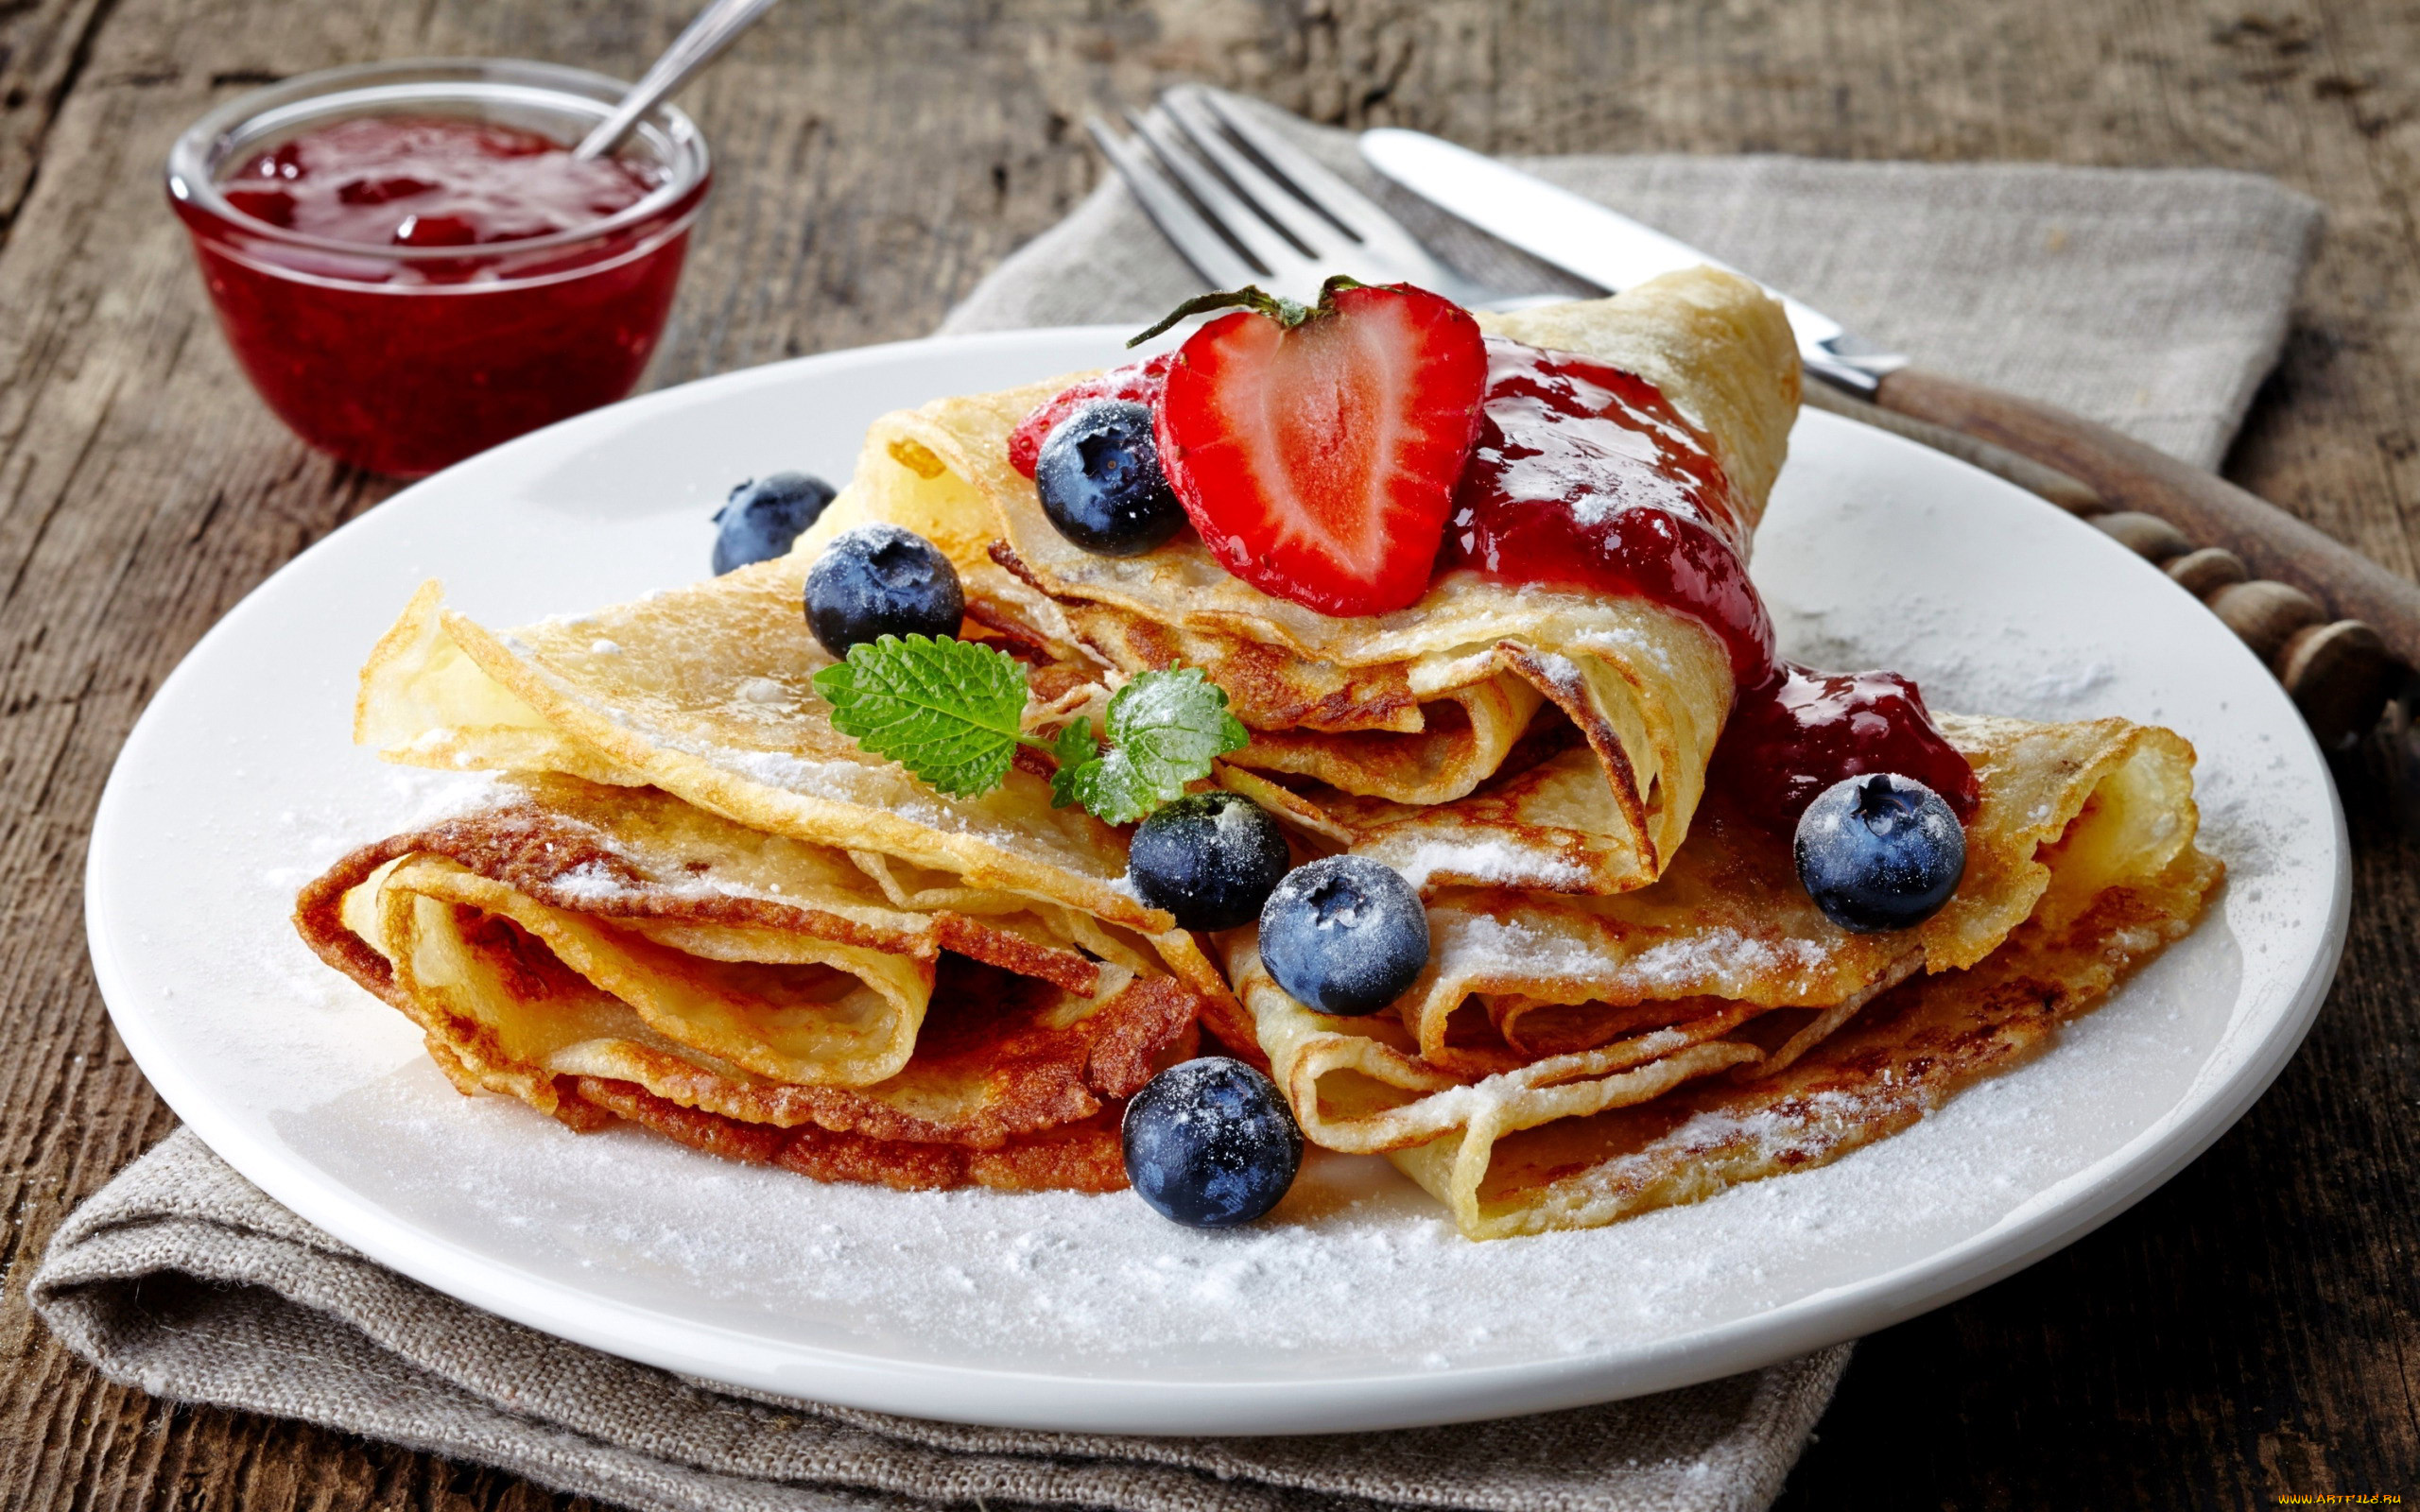 Strawberries Fruit Food Sweets Crepes Blueberries Mint Leaves Sugar Plates Fork Table Knife Wooden S 2560x1600